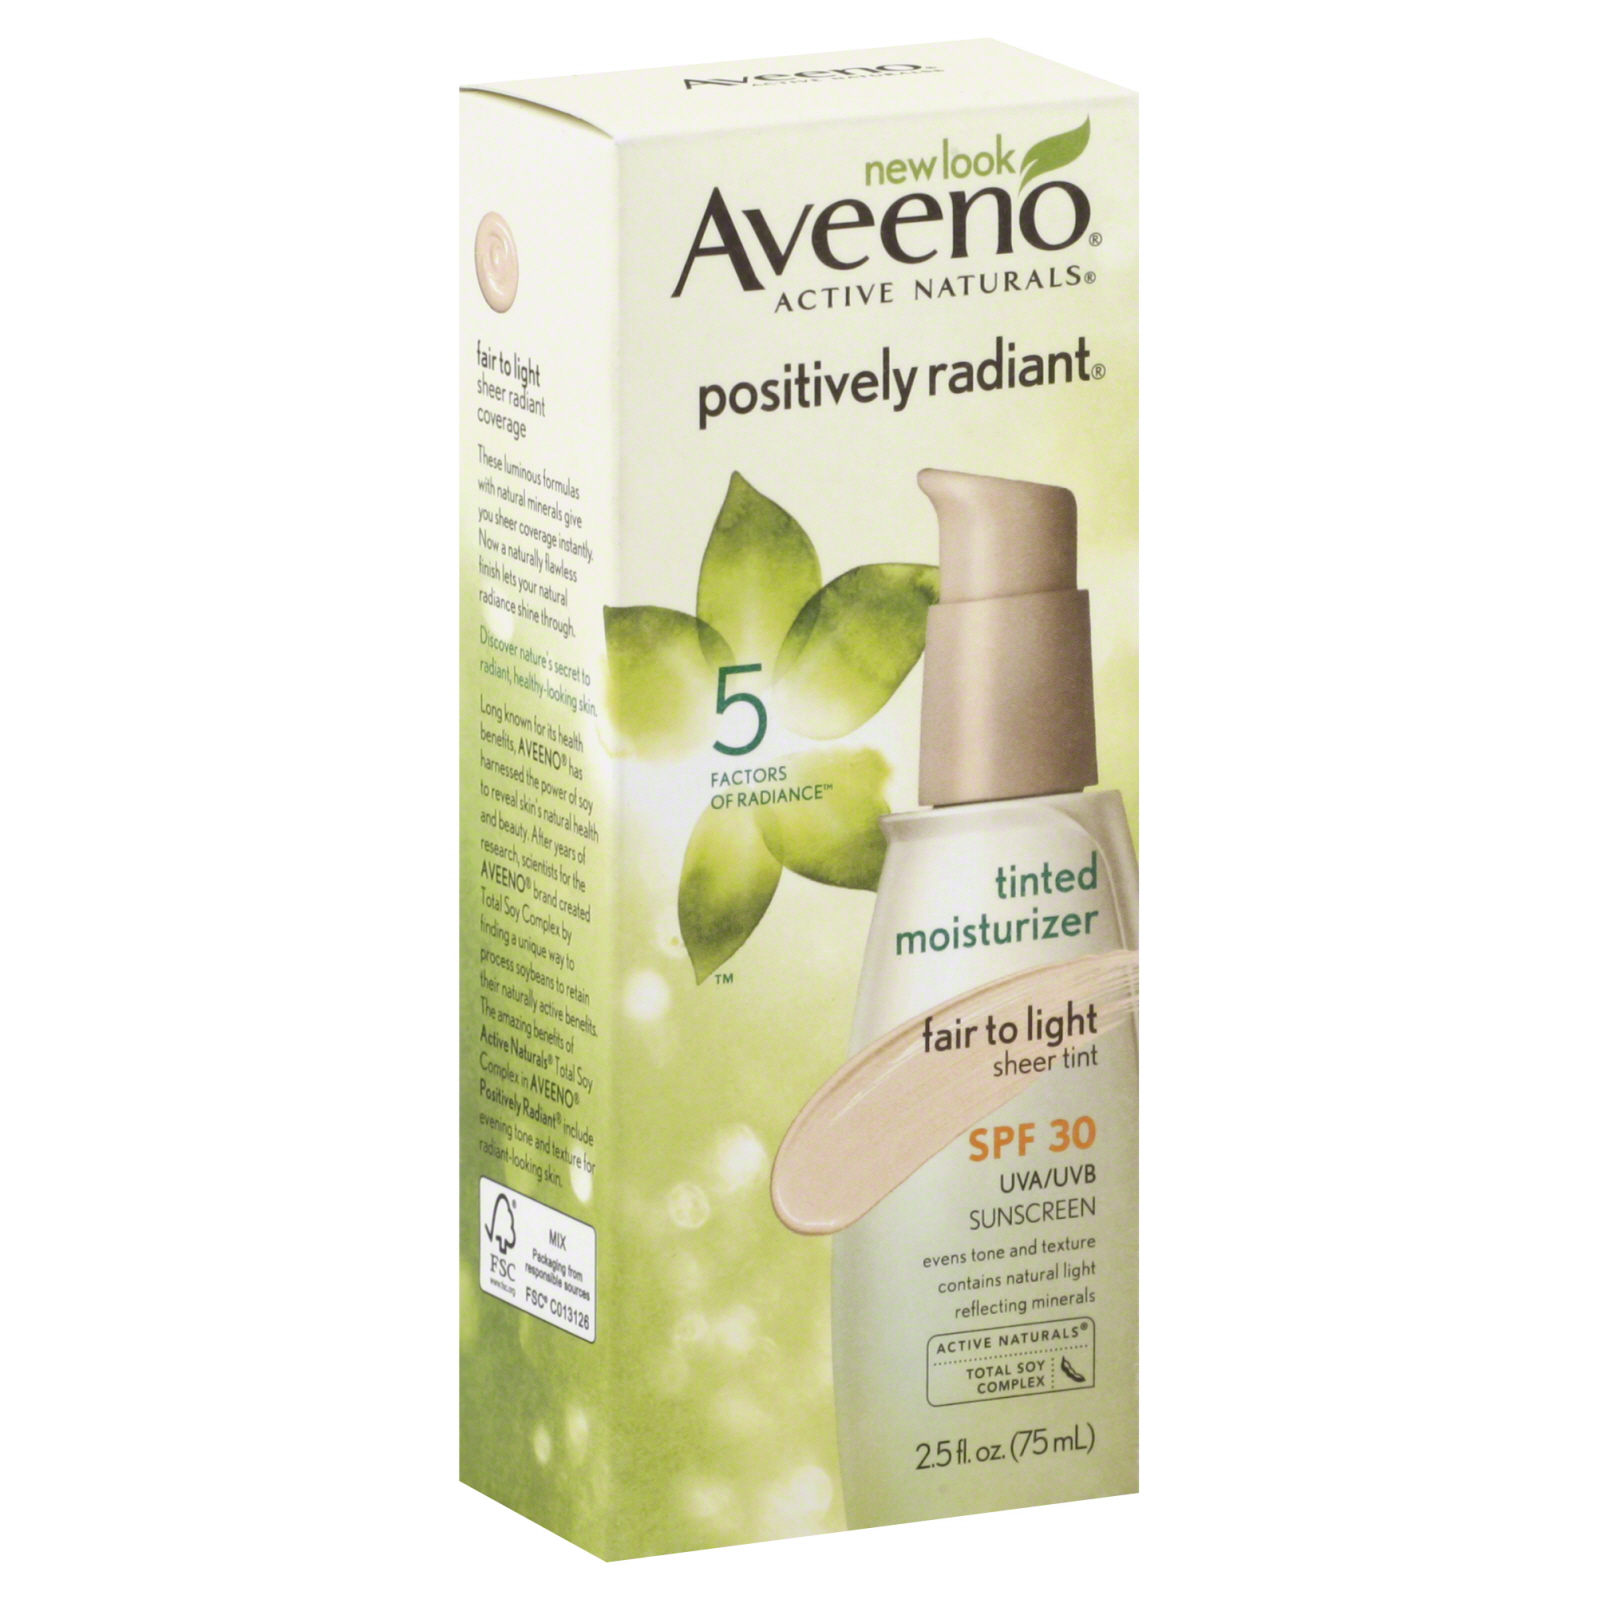 Aveeno Active Naturals Positively Radiant Tinted Moisturizer, Fair to Light Sheer Tint 2.5 fl oz (75 ml)